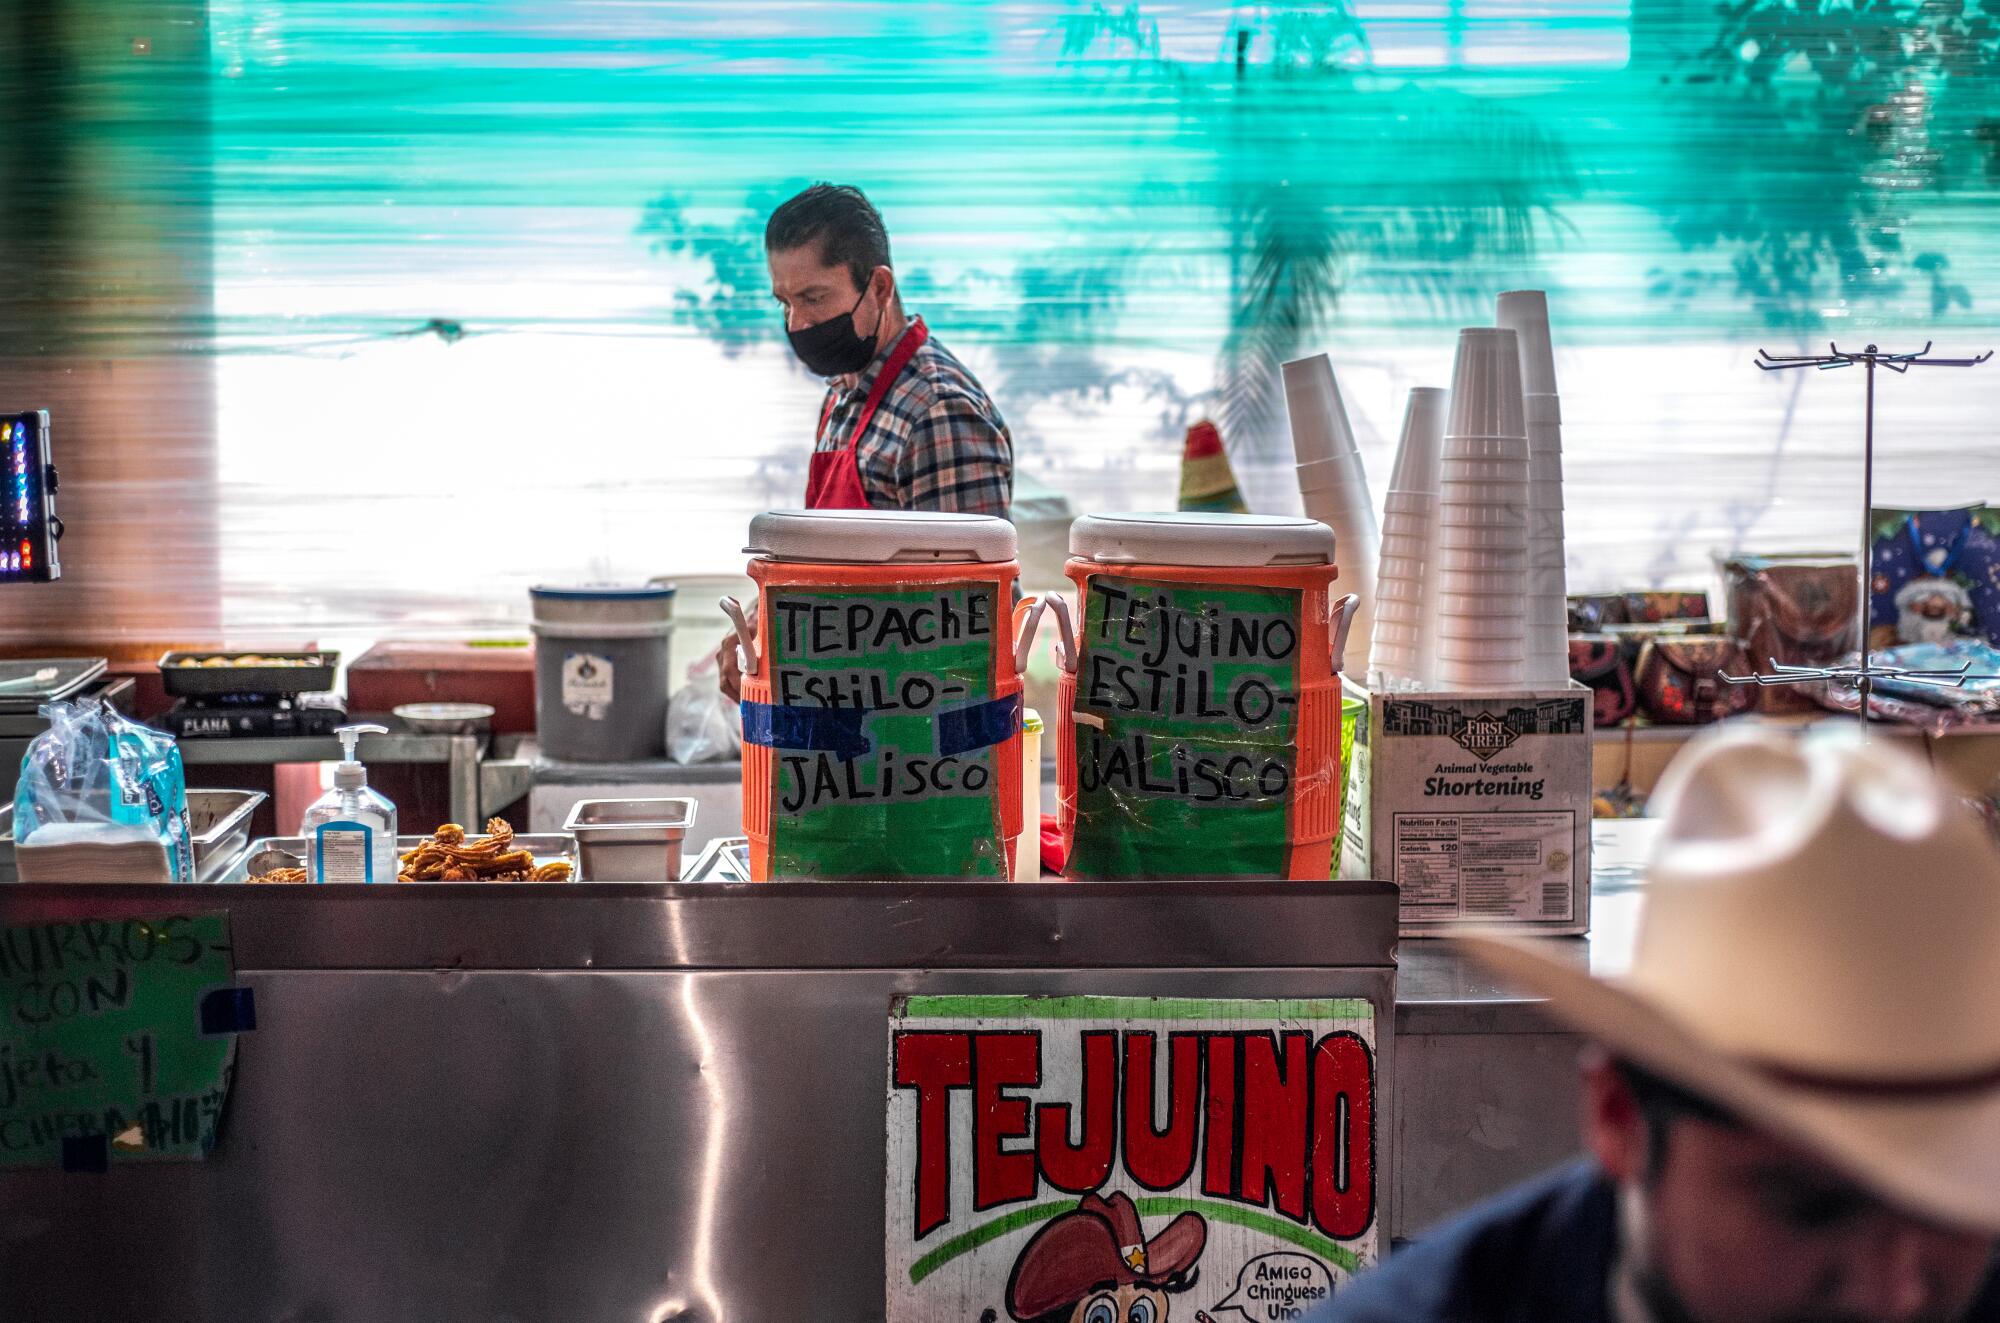 A vendor with coolers of tejuino and stacks of styrofoam cups.